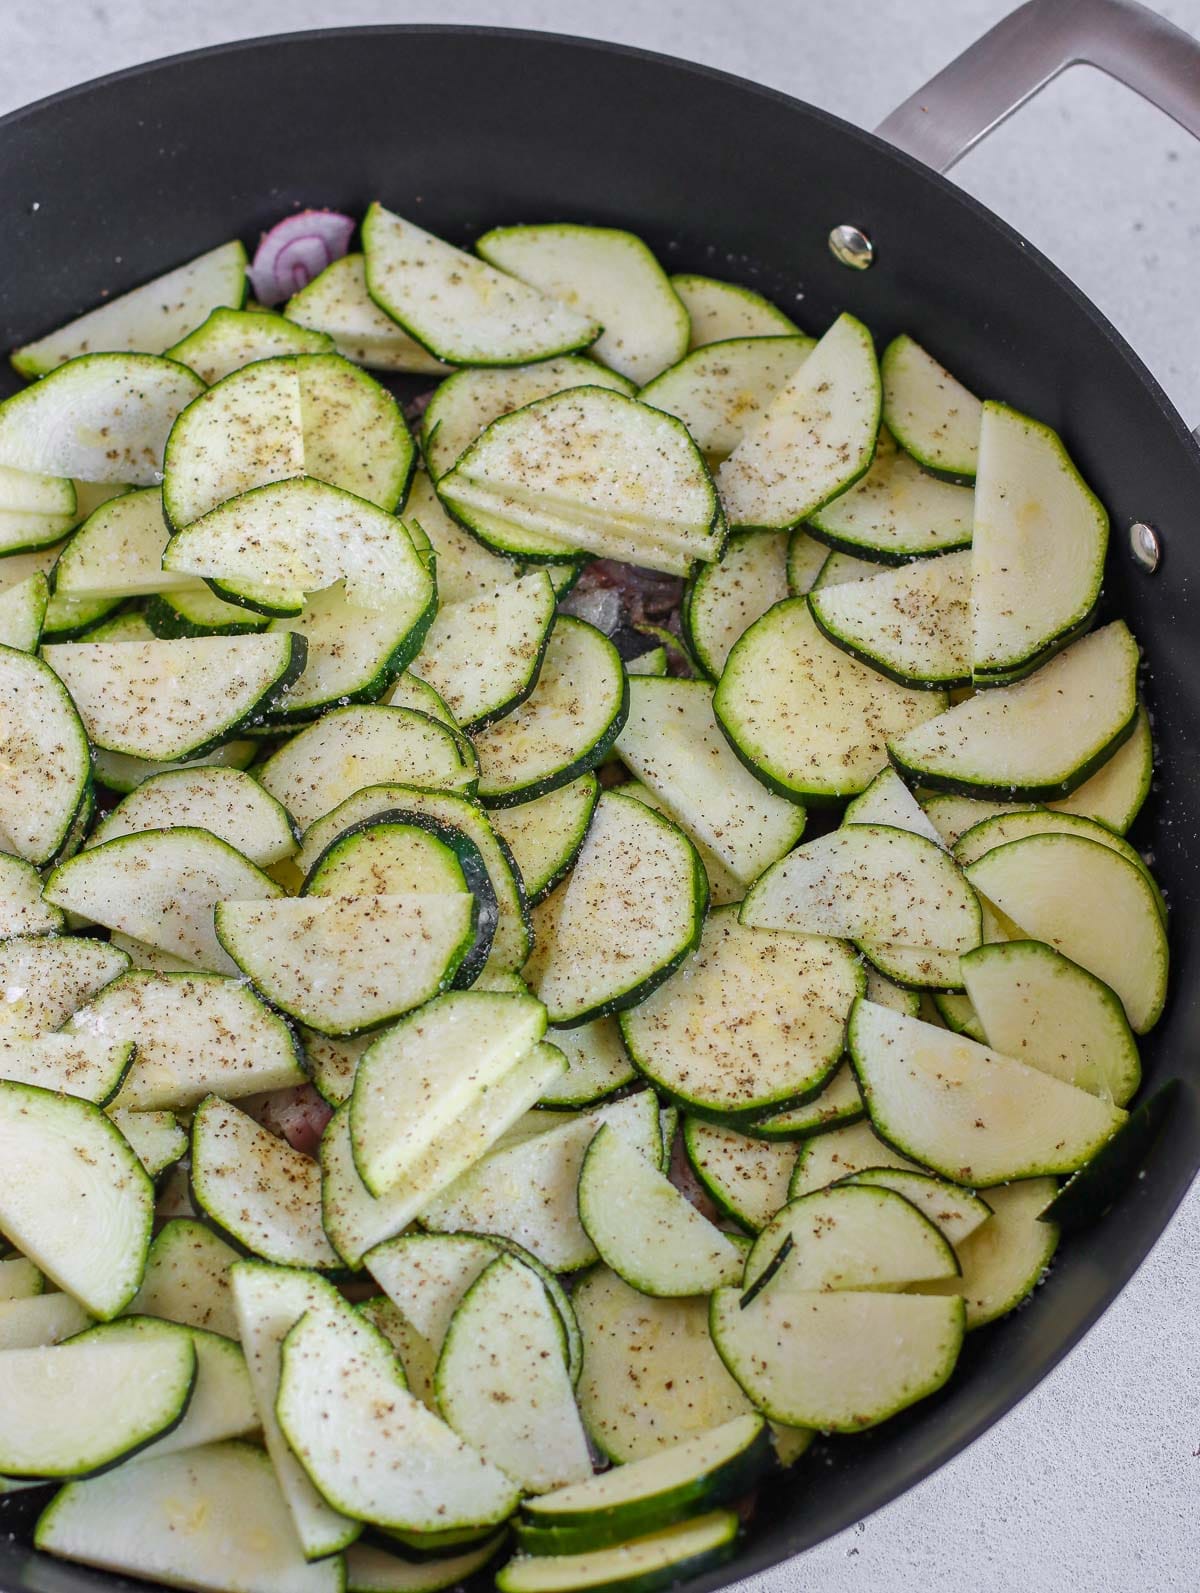 frying the zucchini with the onions